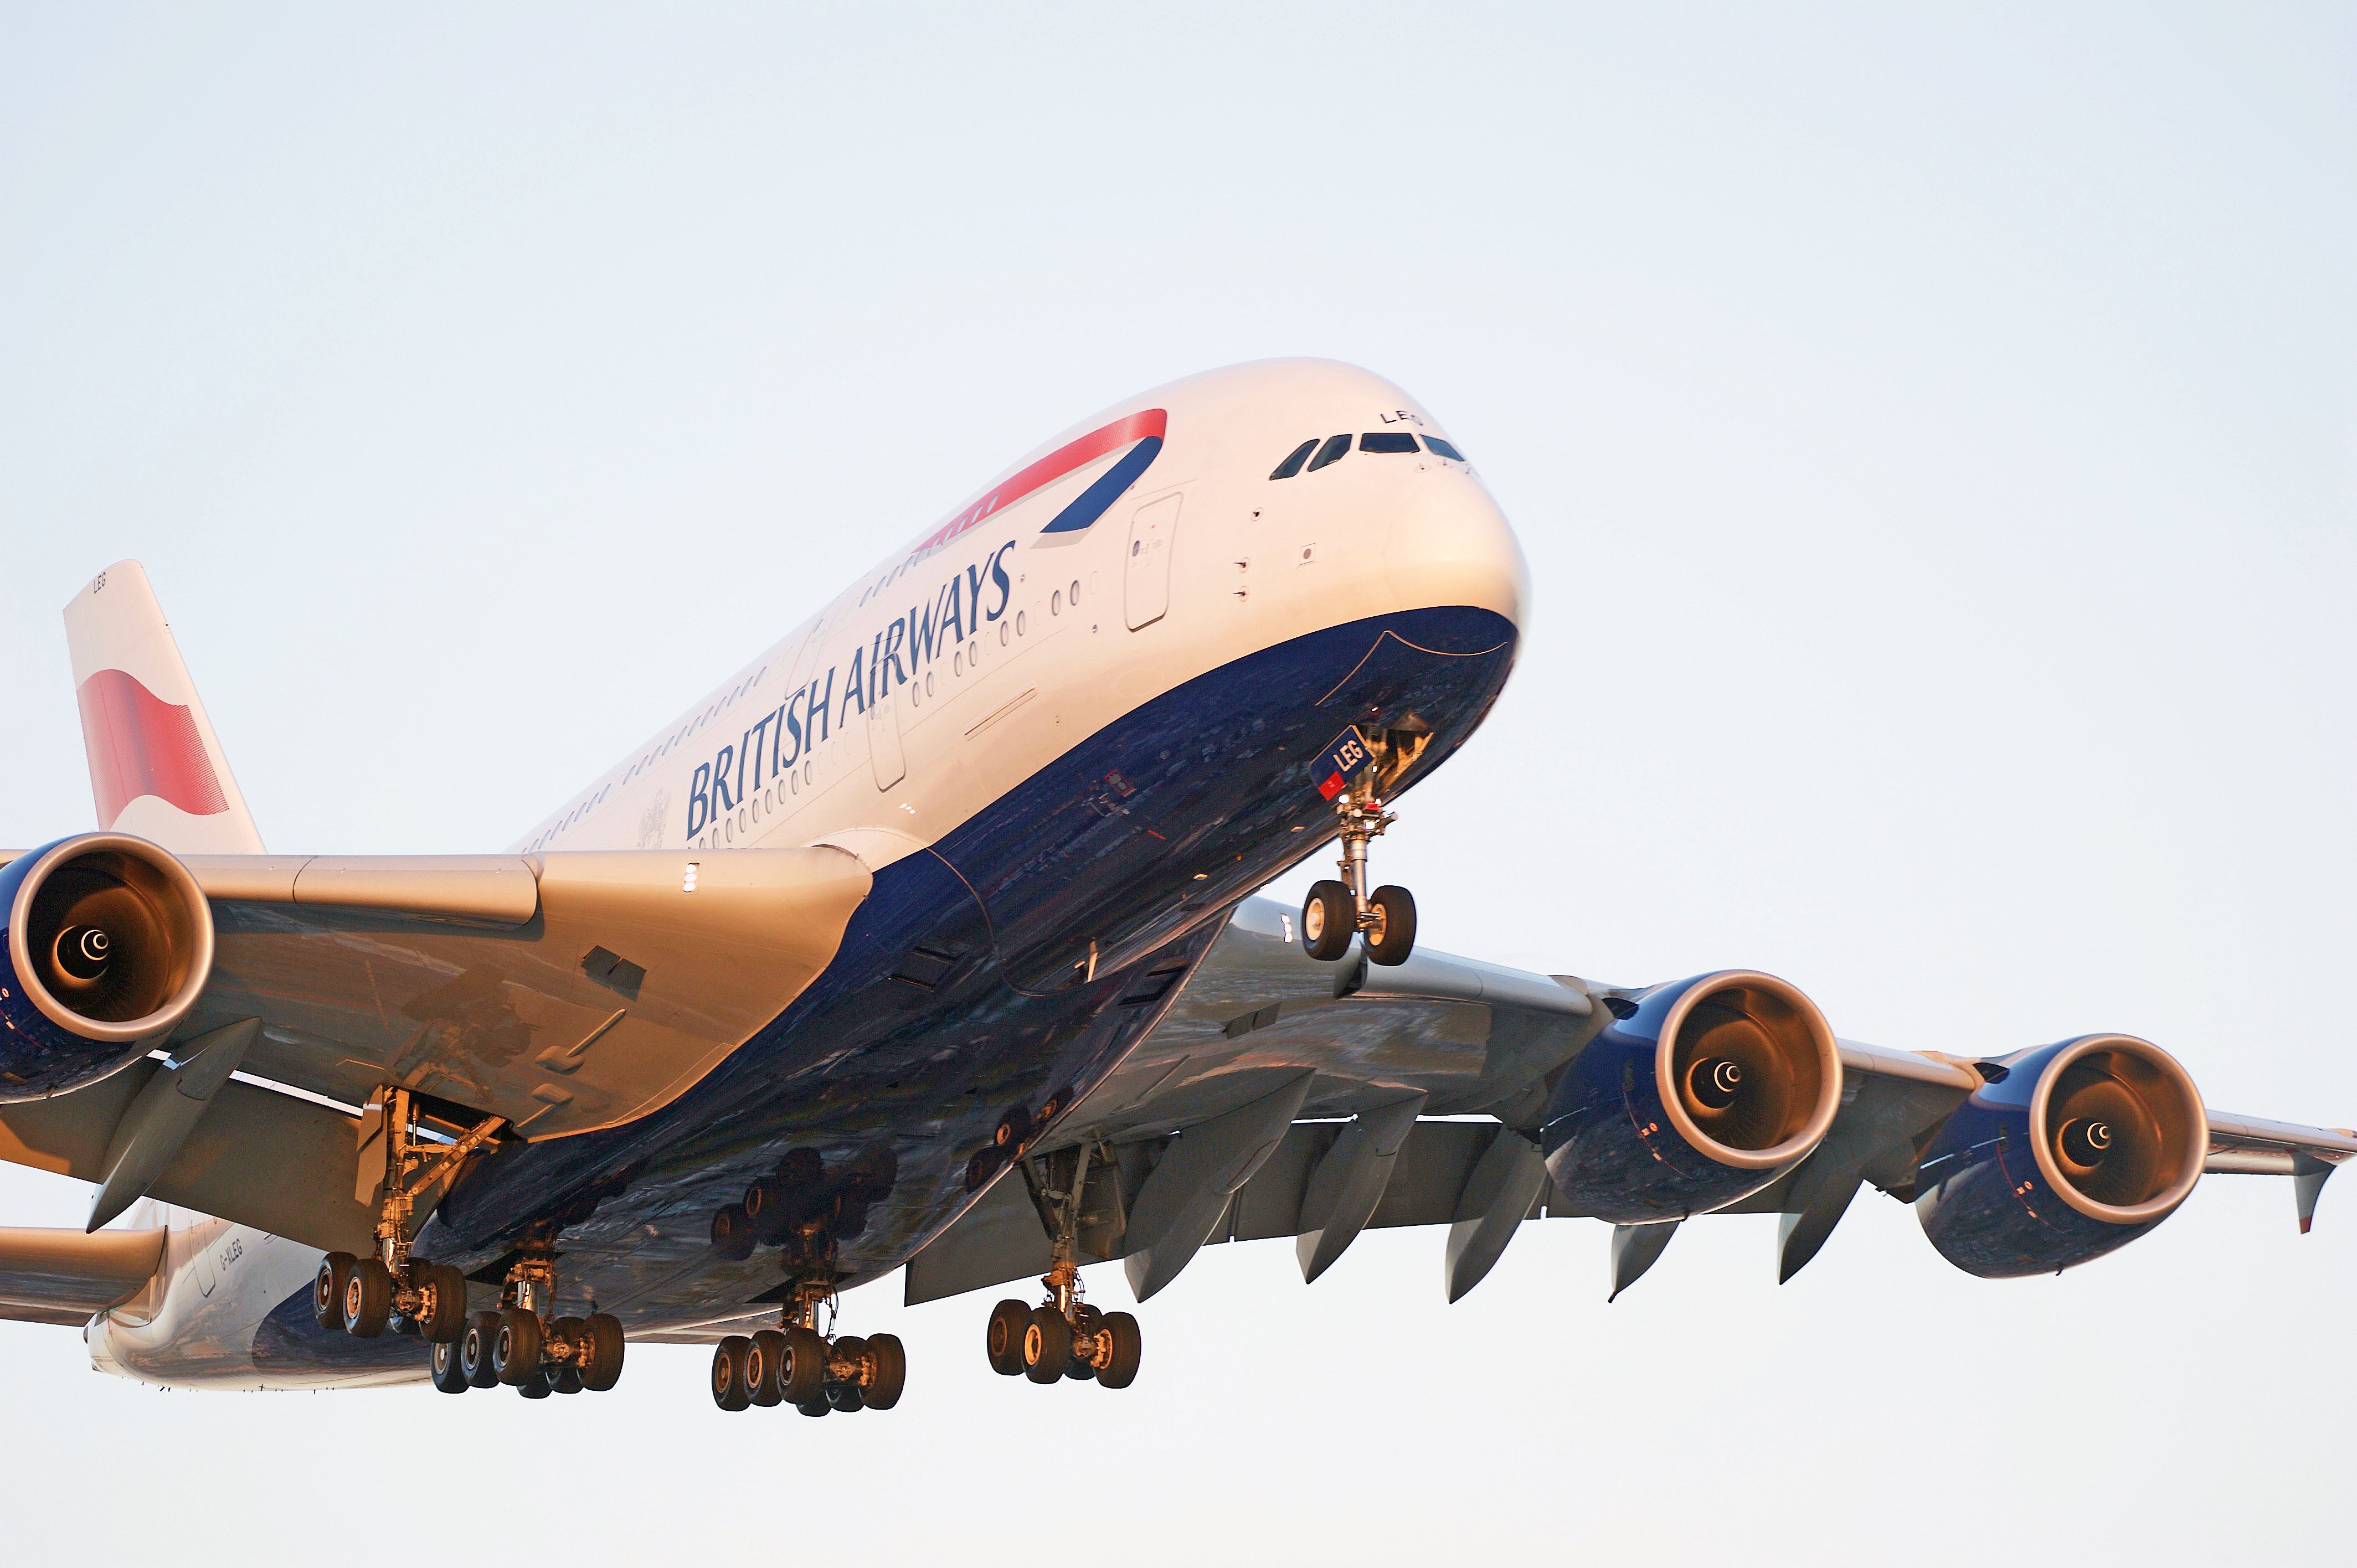 British Airways Airbus A380 approaching runway for a landing at Los Angeles International Airport